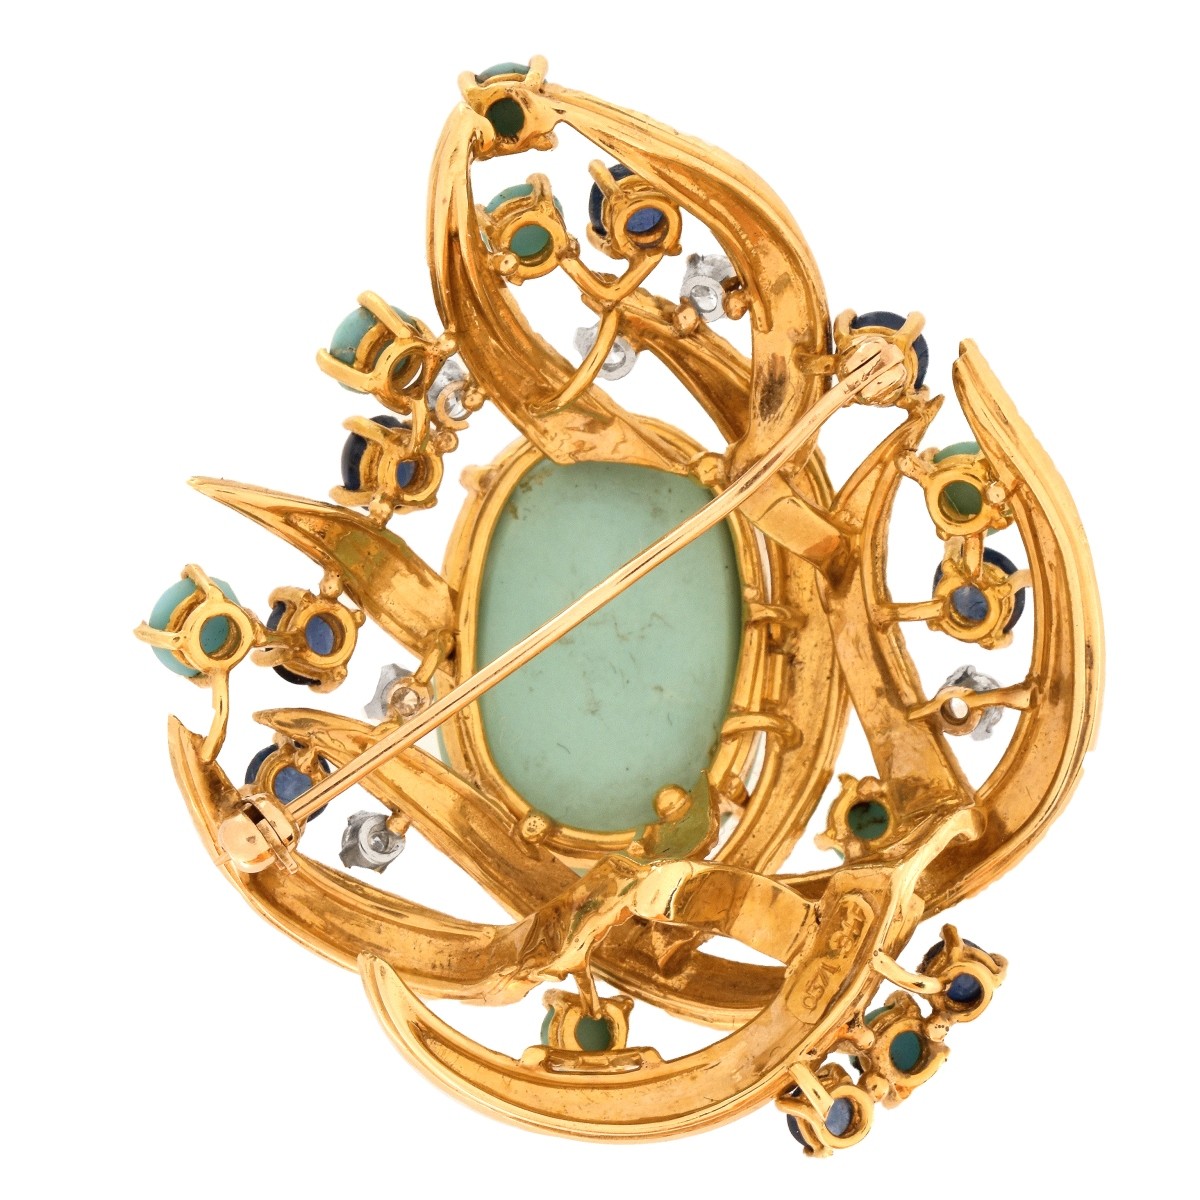 Spitzer & Furman Turquoise and 18K Brooch